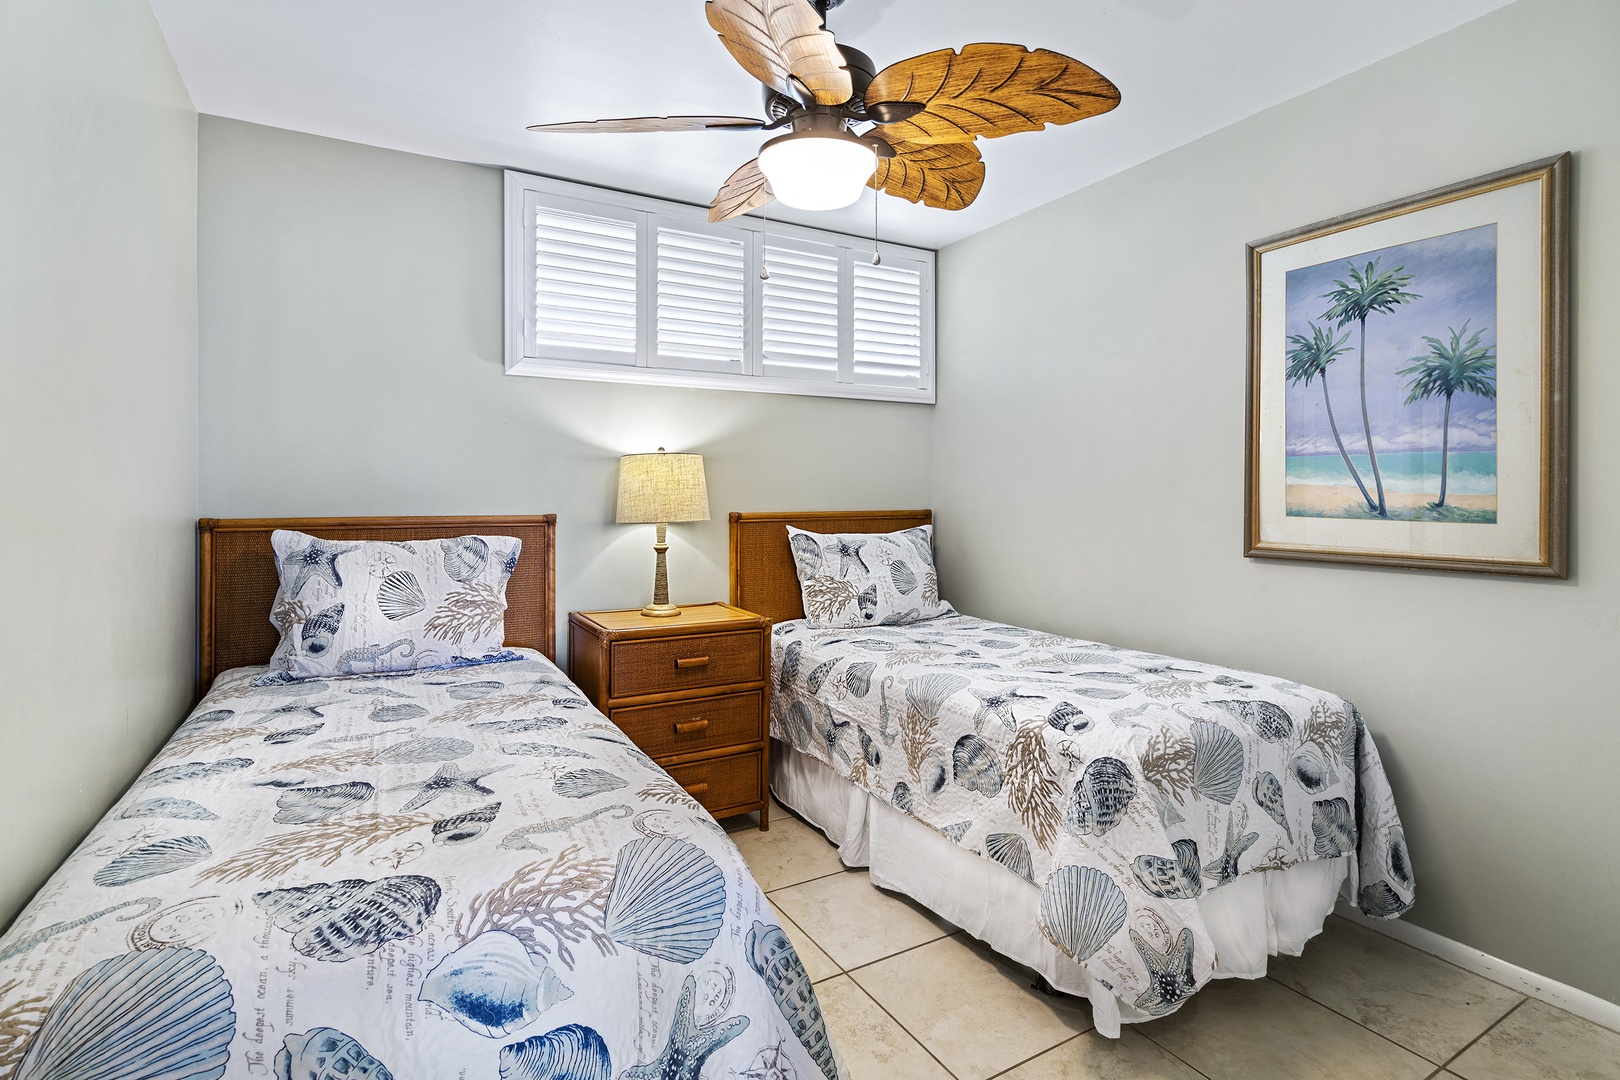 Kailua Kona Vacation Rentals, Sea Village 1105 - Guest bedroom equipped with 2 Twin beds